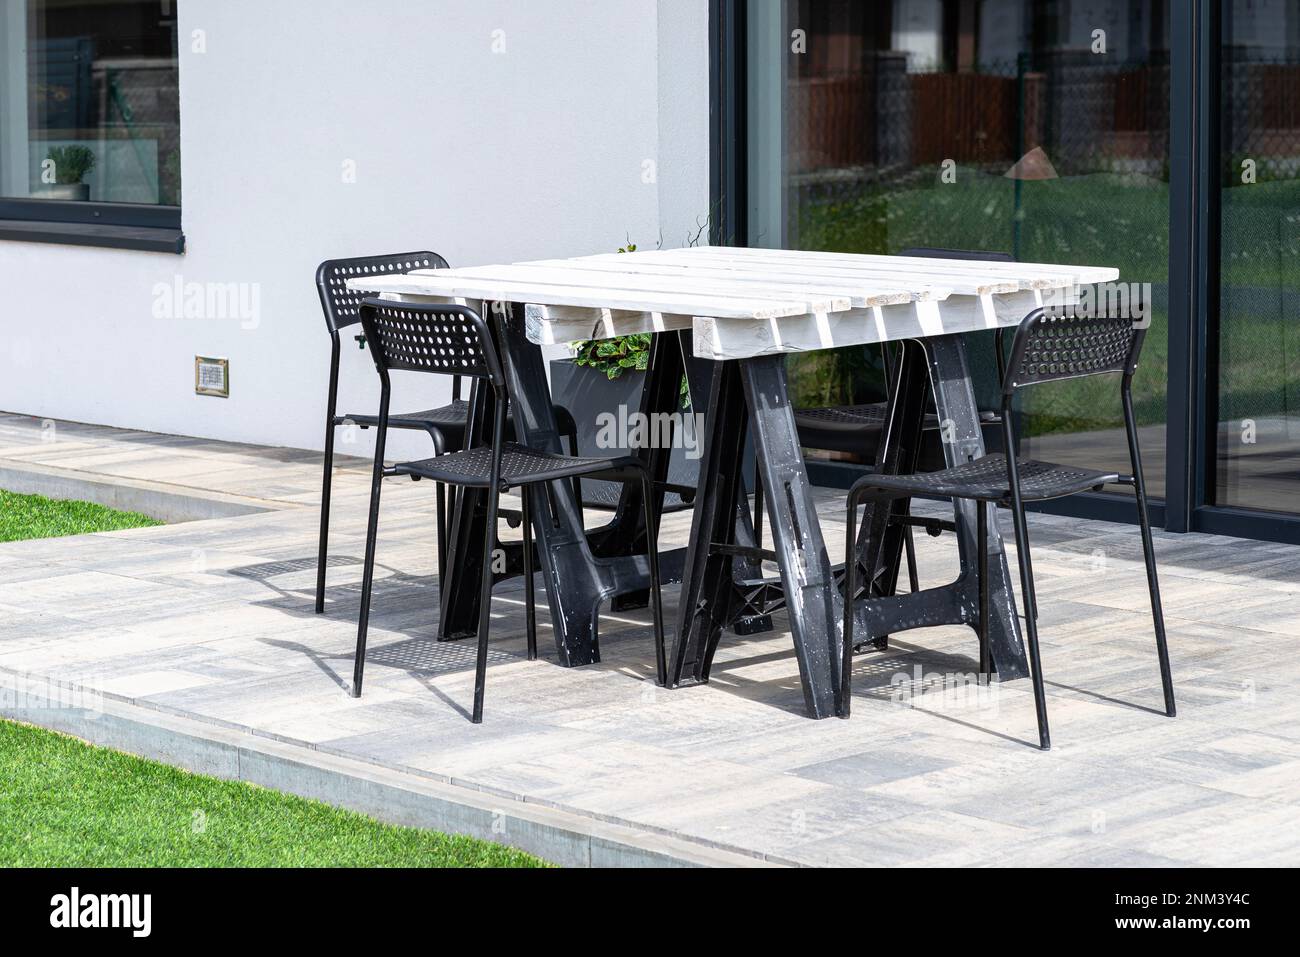 Terrace table made of white pallet standing on plastic trestles, black plastic chairs. Stock Photo